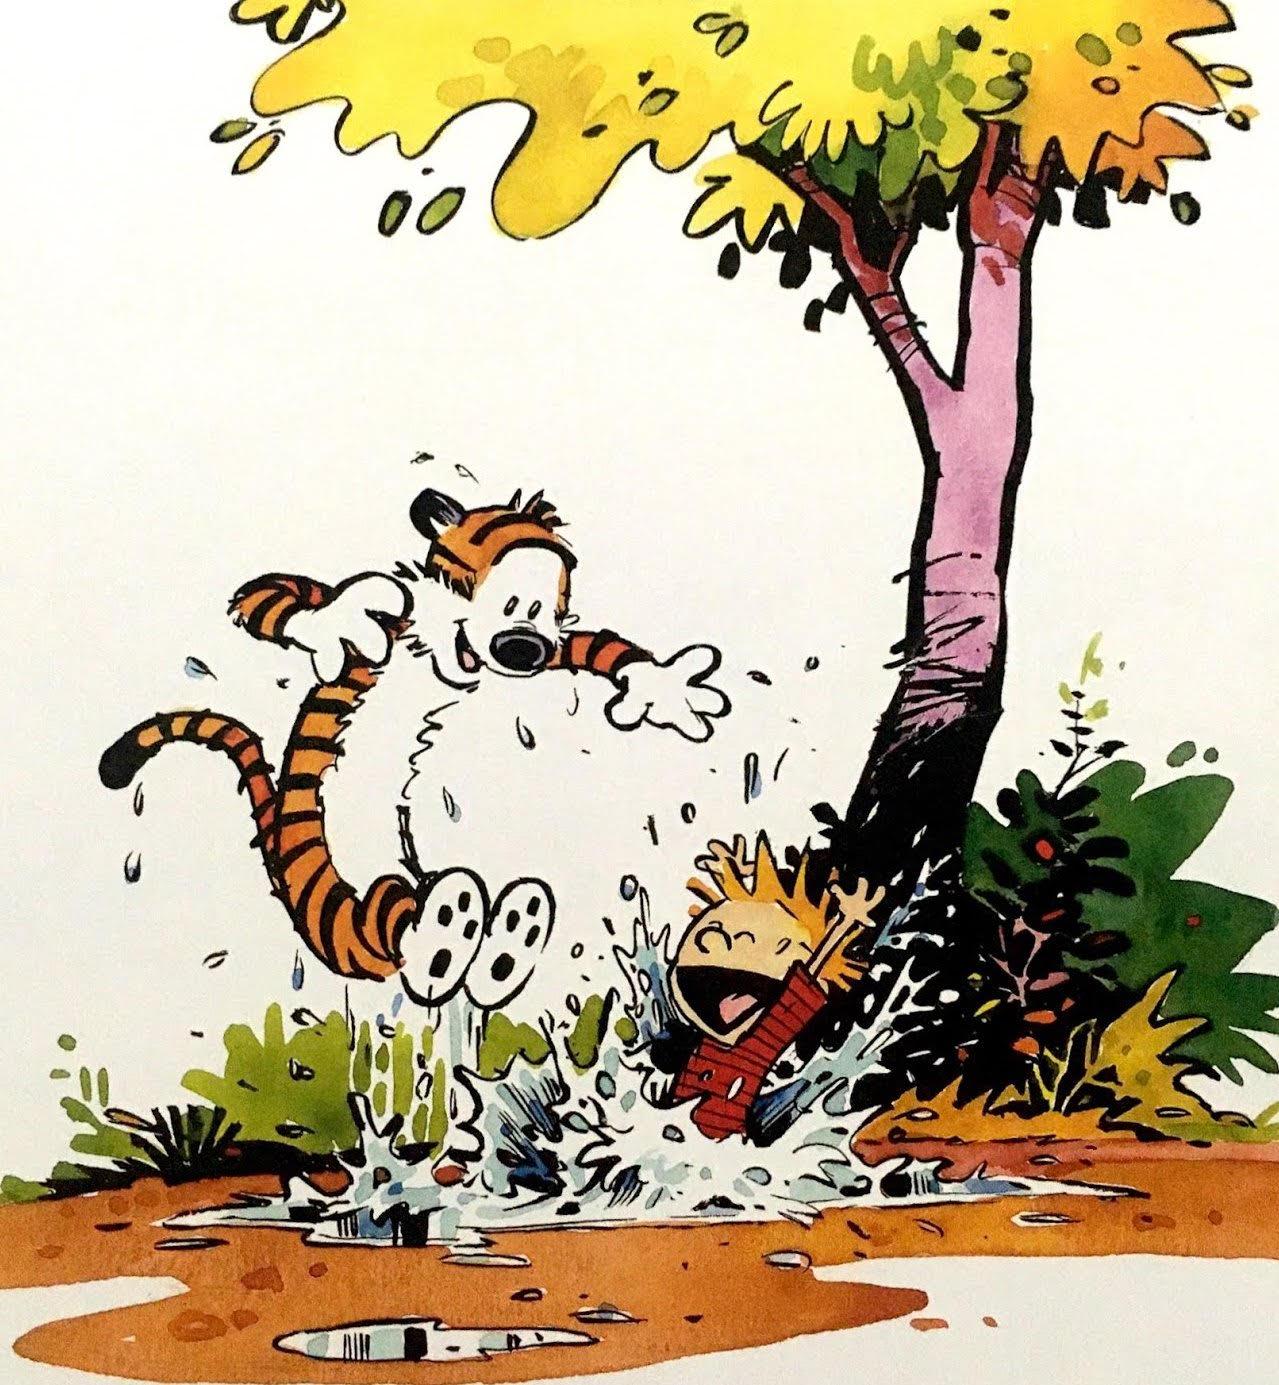 calvin and hobbs jumping in a puddle